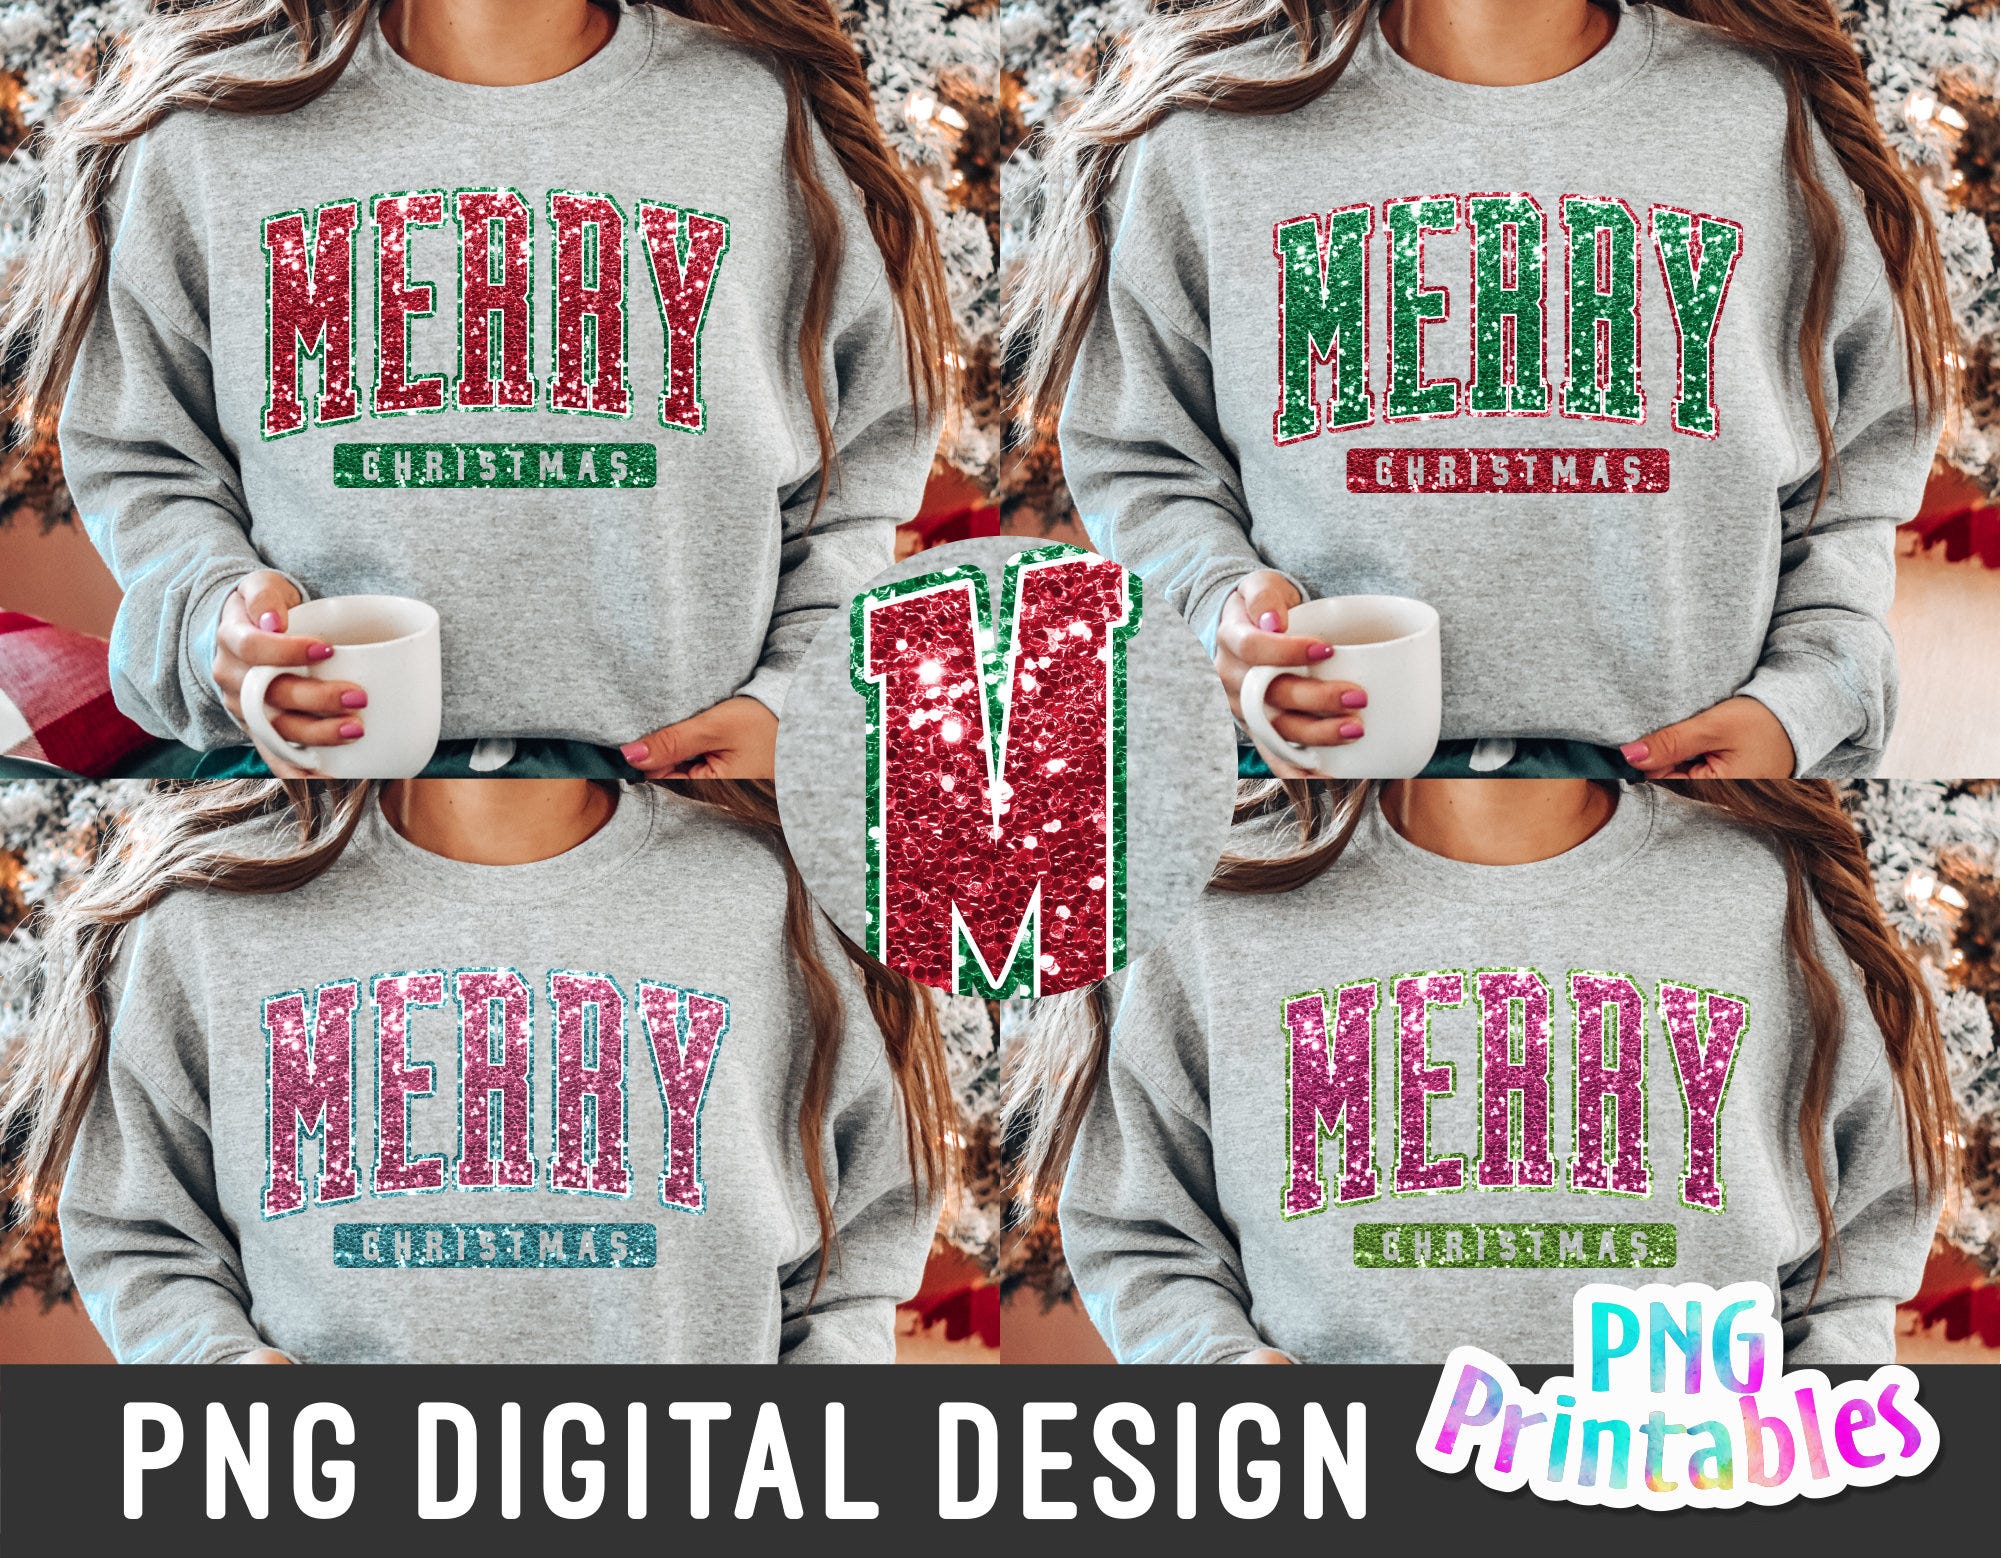 Merry Christmas Sequin png - Christmas Sublimation - Merry Christmas Glitter png Print File For Sublimation Or Print - Digital Download